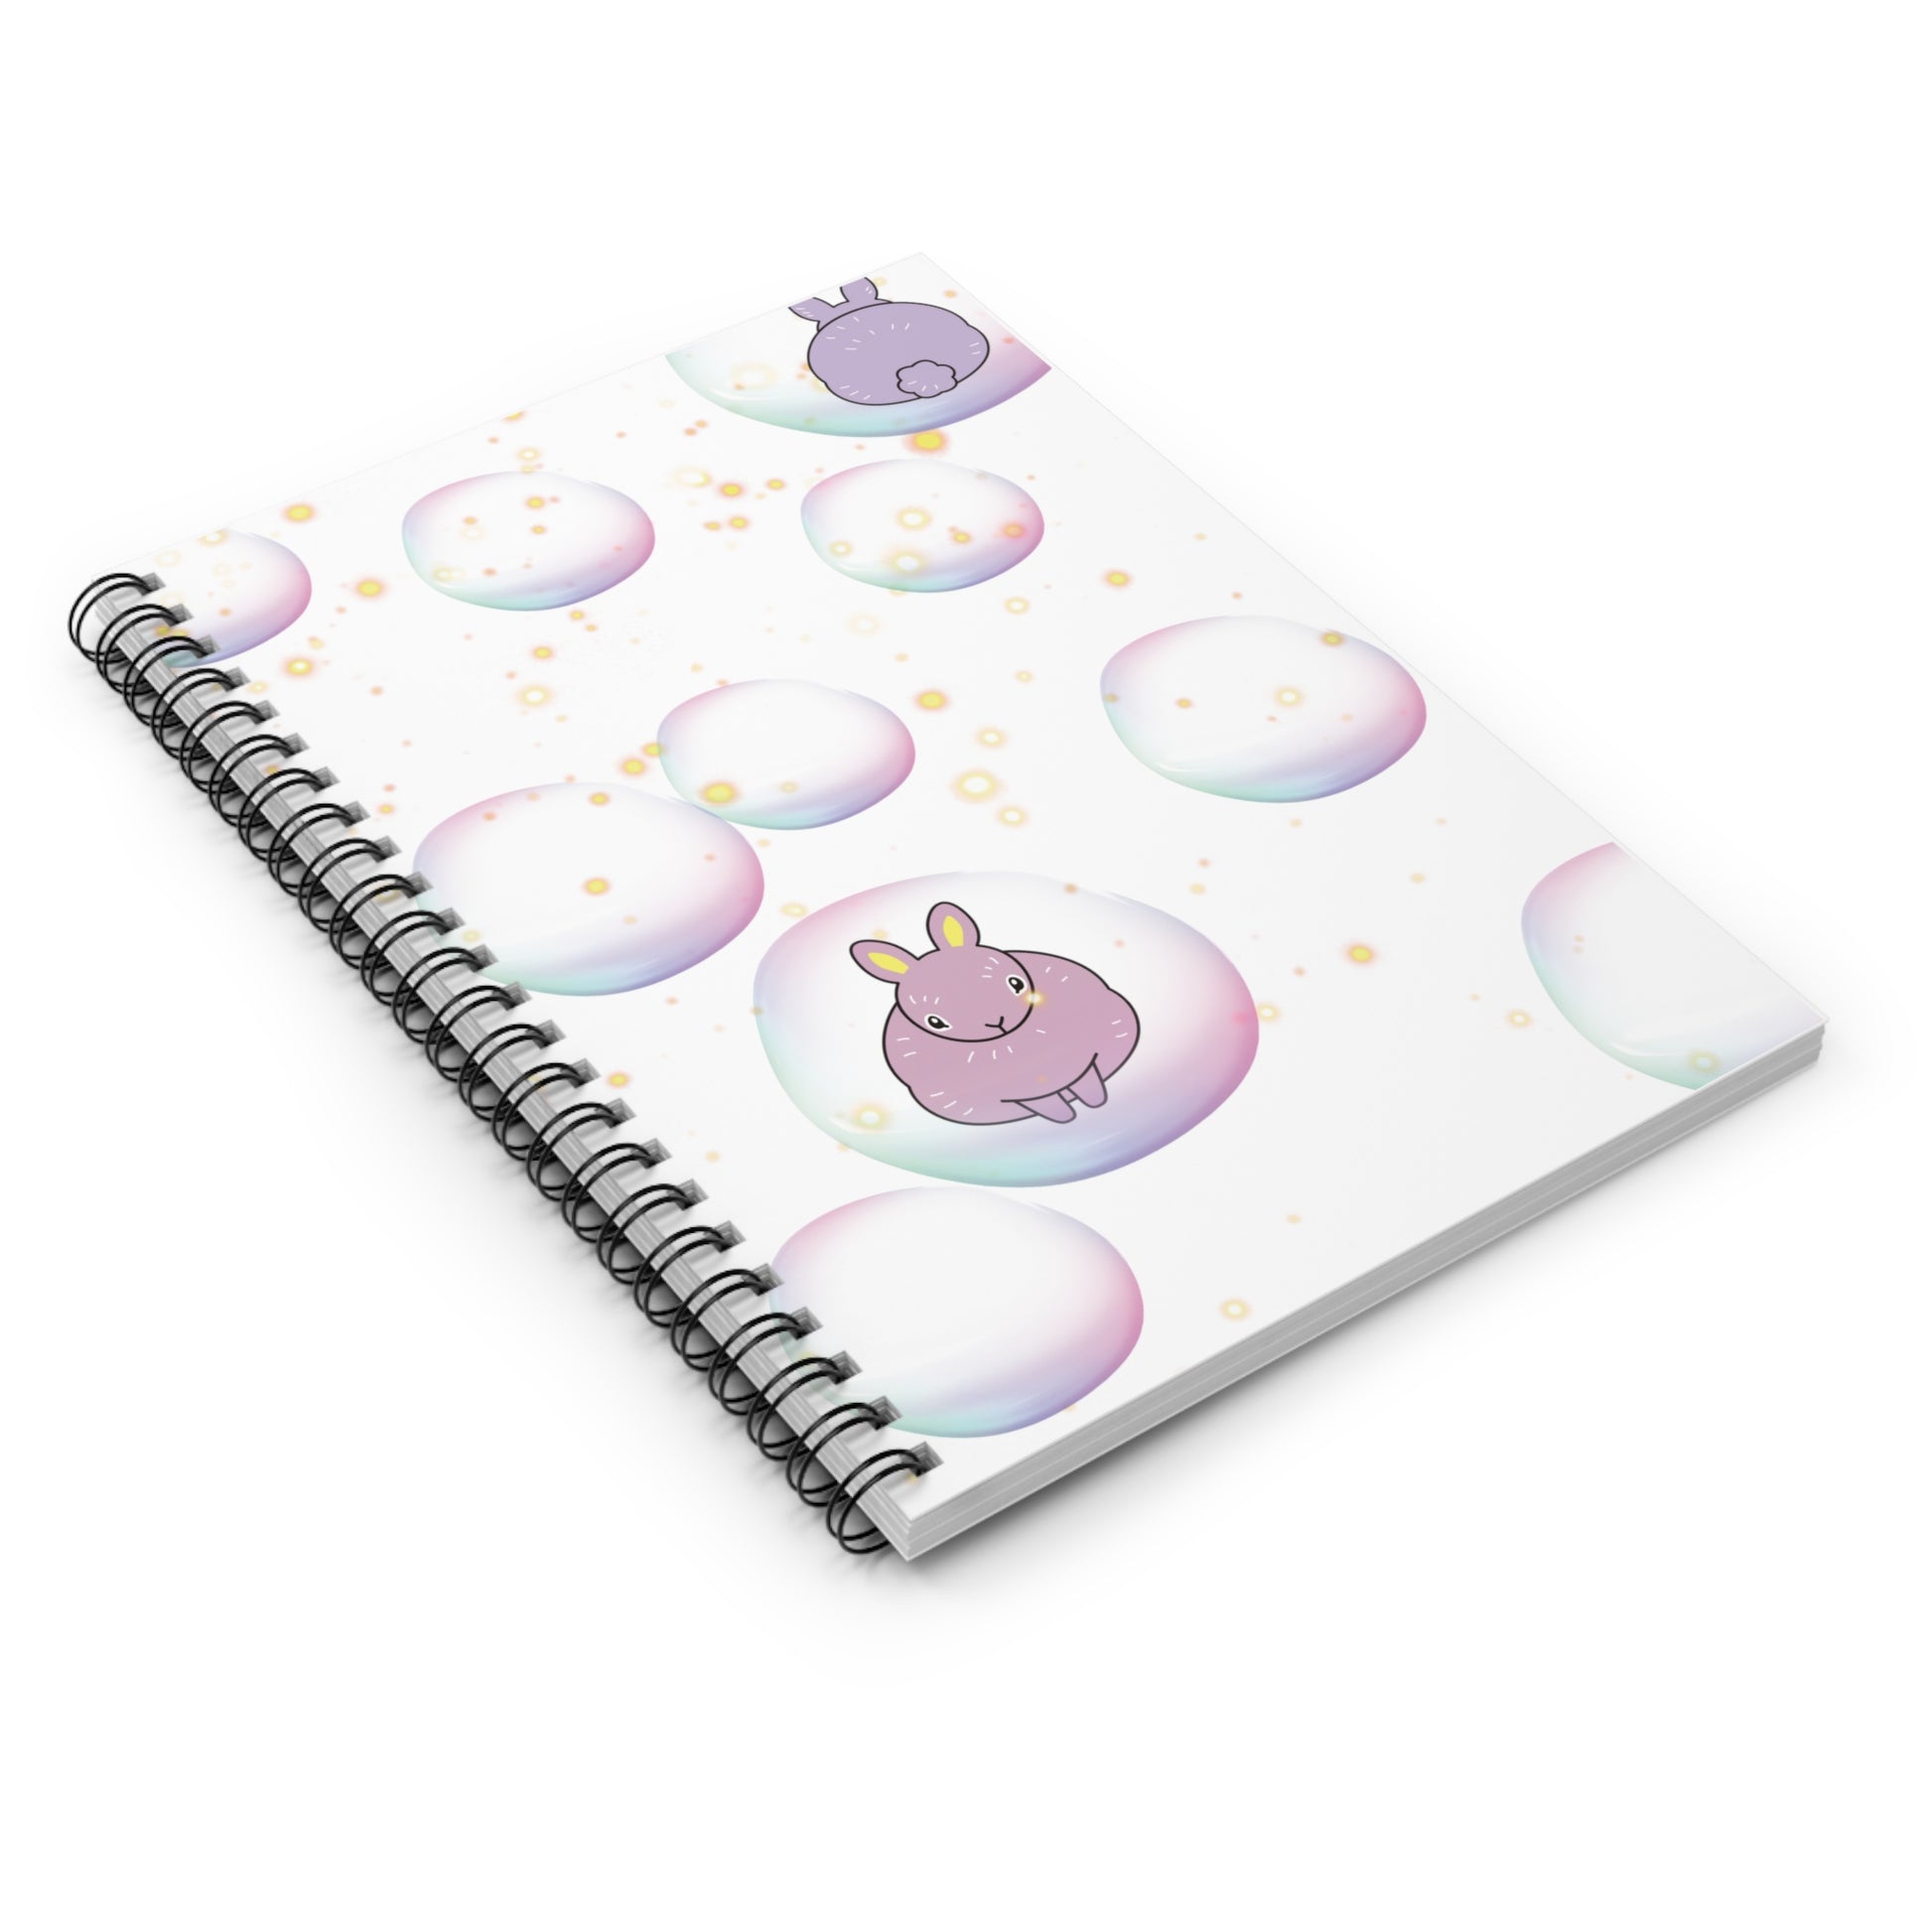 Little Bunny Foo Foo: Spiral Notebook - Log Books - Journals - Diaries - and More Custom Printed by TheGlassyLass